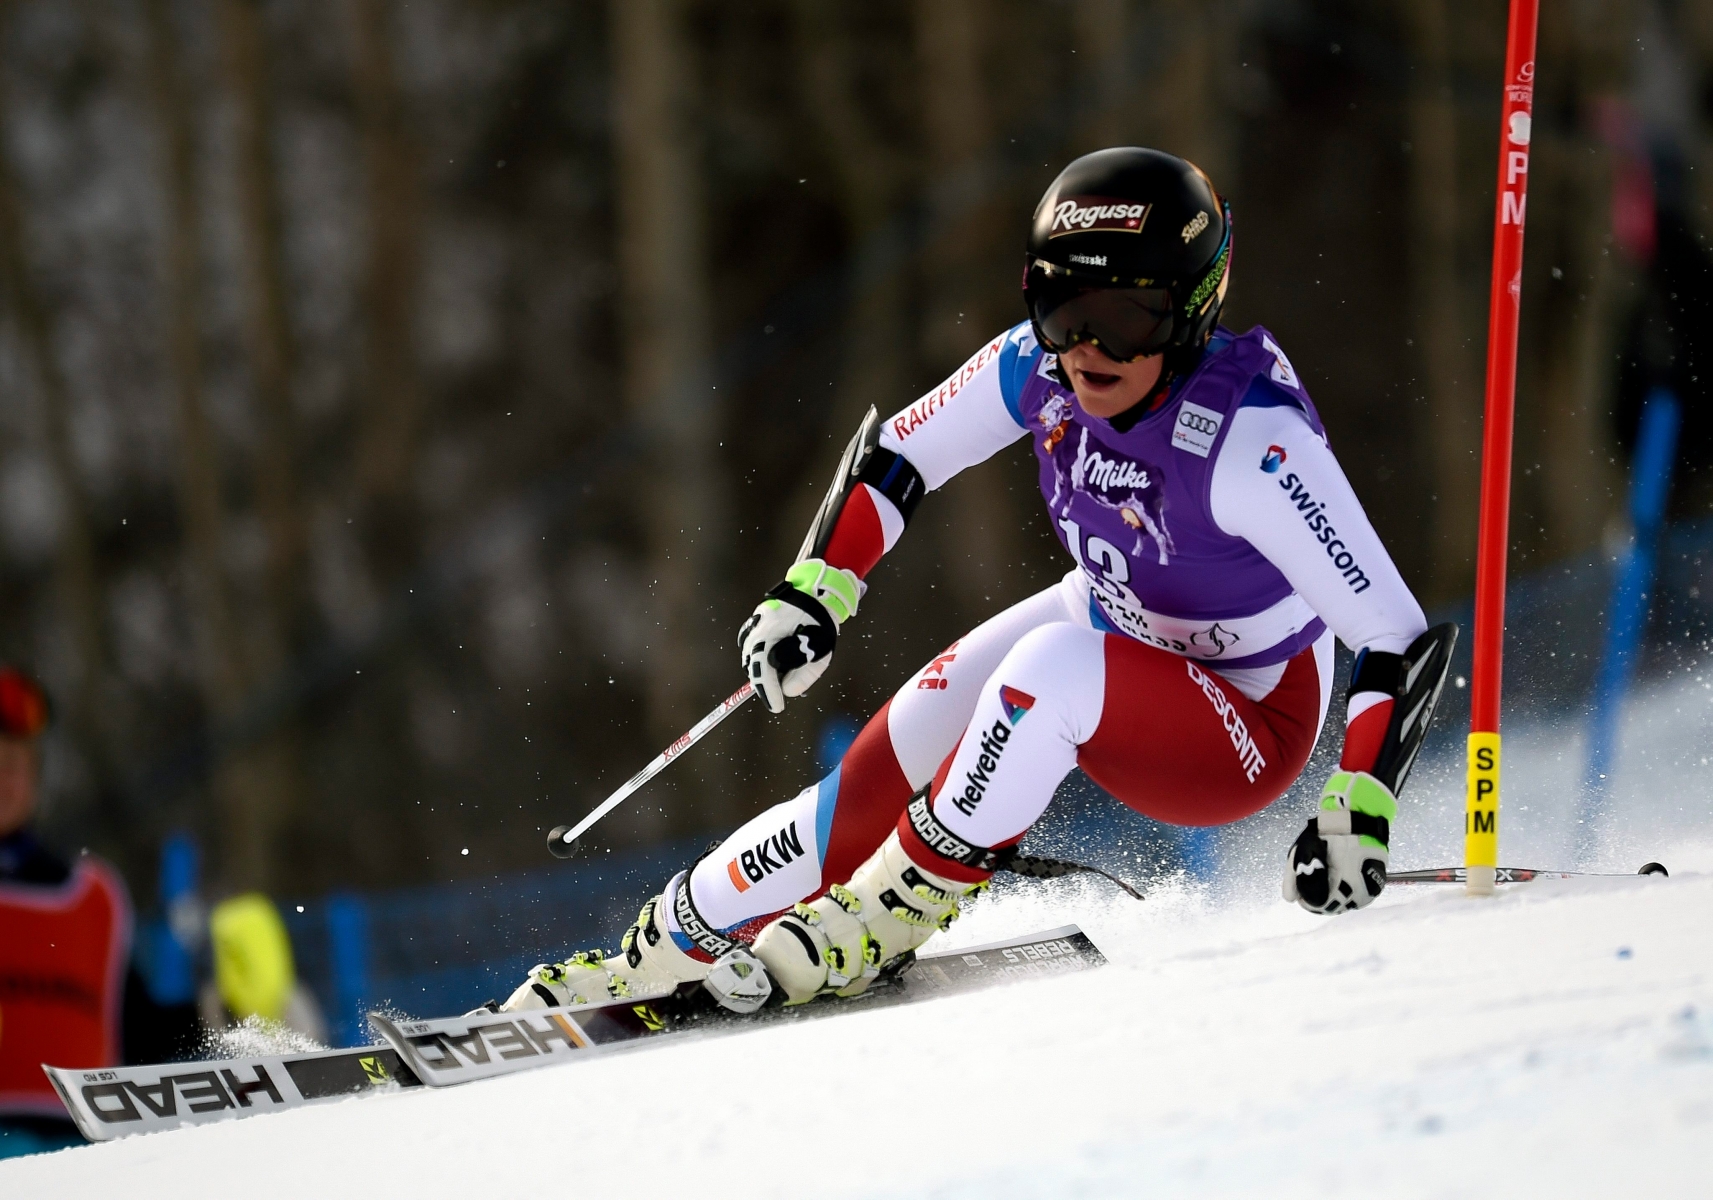 epa05045109 Lara Gut of Switzerland in action during first run of the women's Giant Slalom at the FIS Alpine Ski World Cup in Aspen, Colorado, USA, 27 November 2015.  EPA/JOHN G. MABANGLO USA ALPINE SKIING WORLD CUP